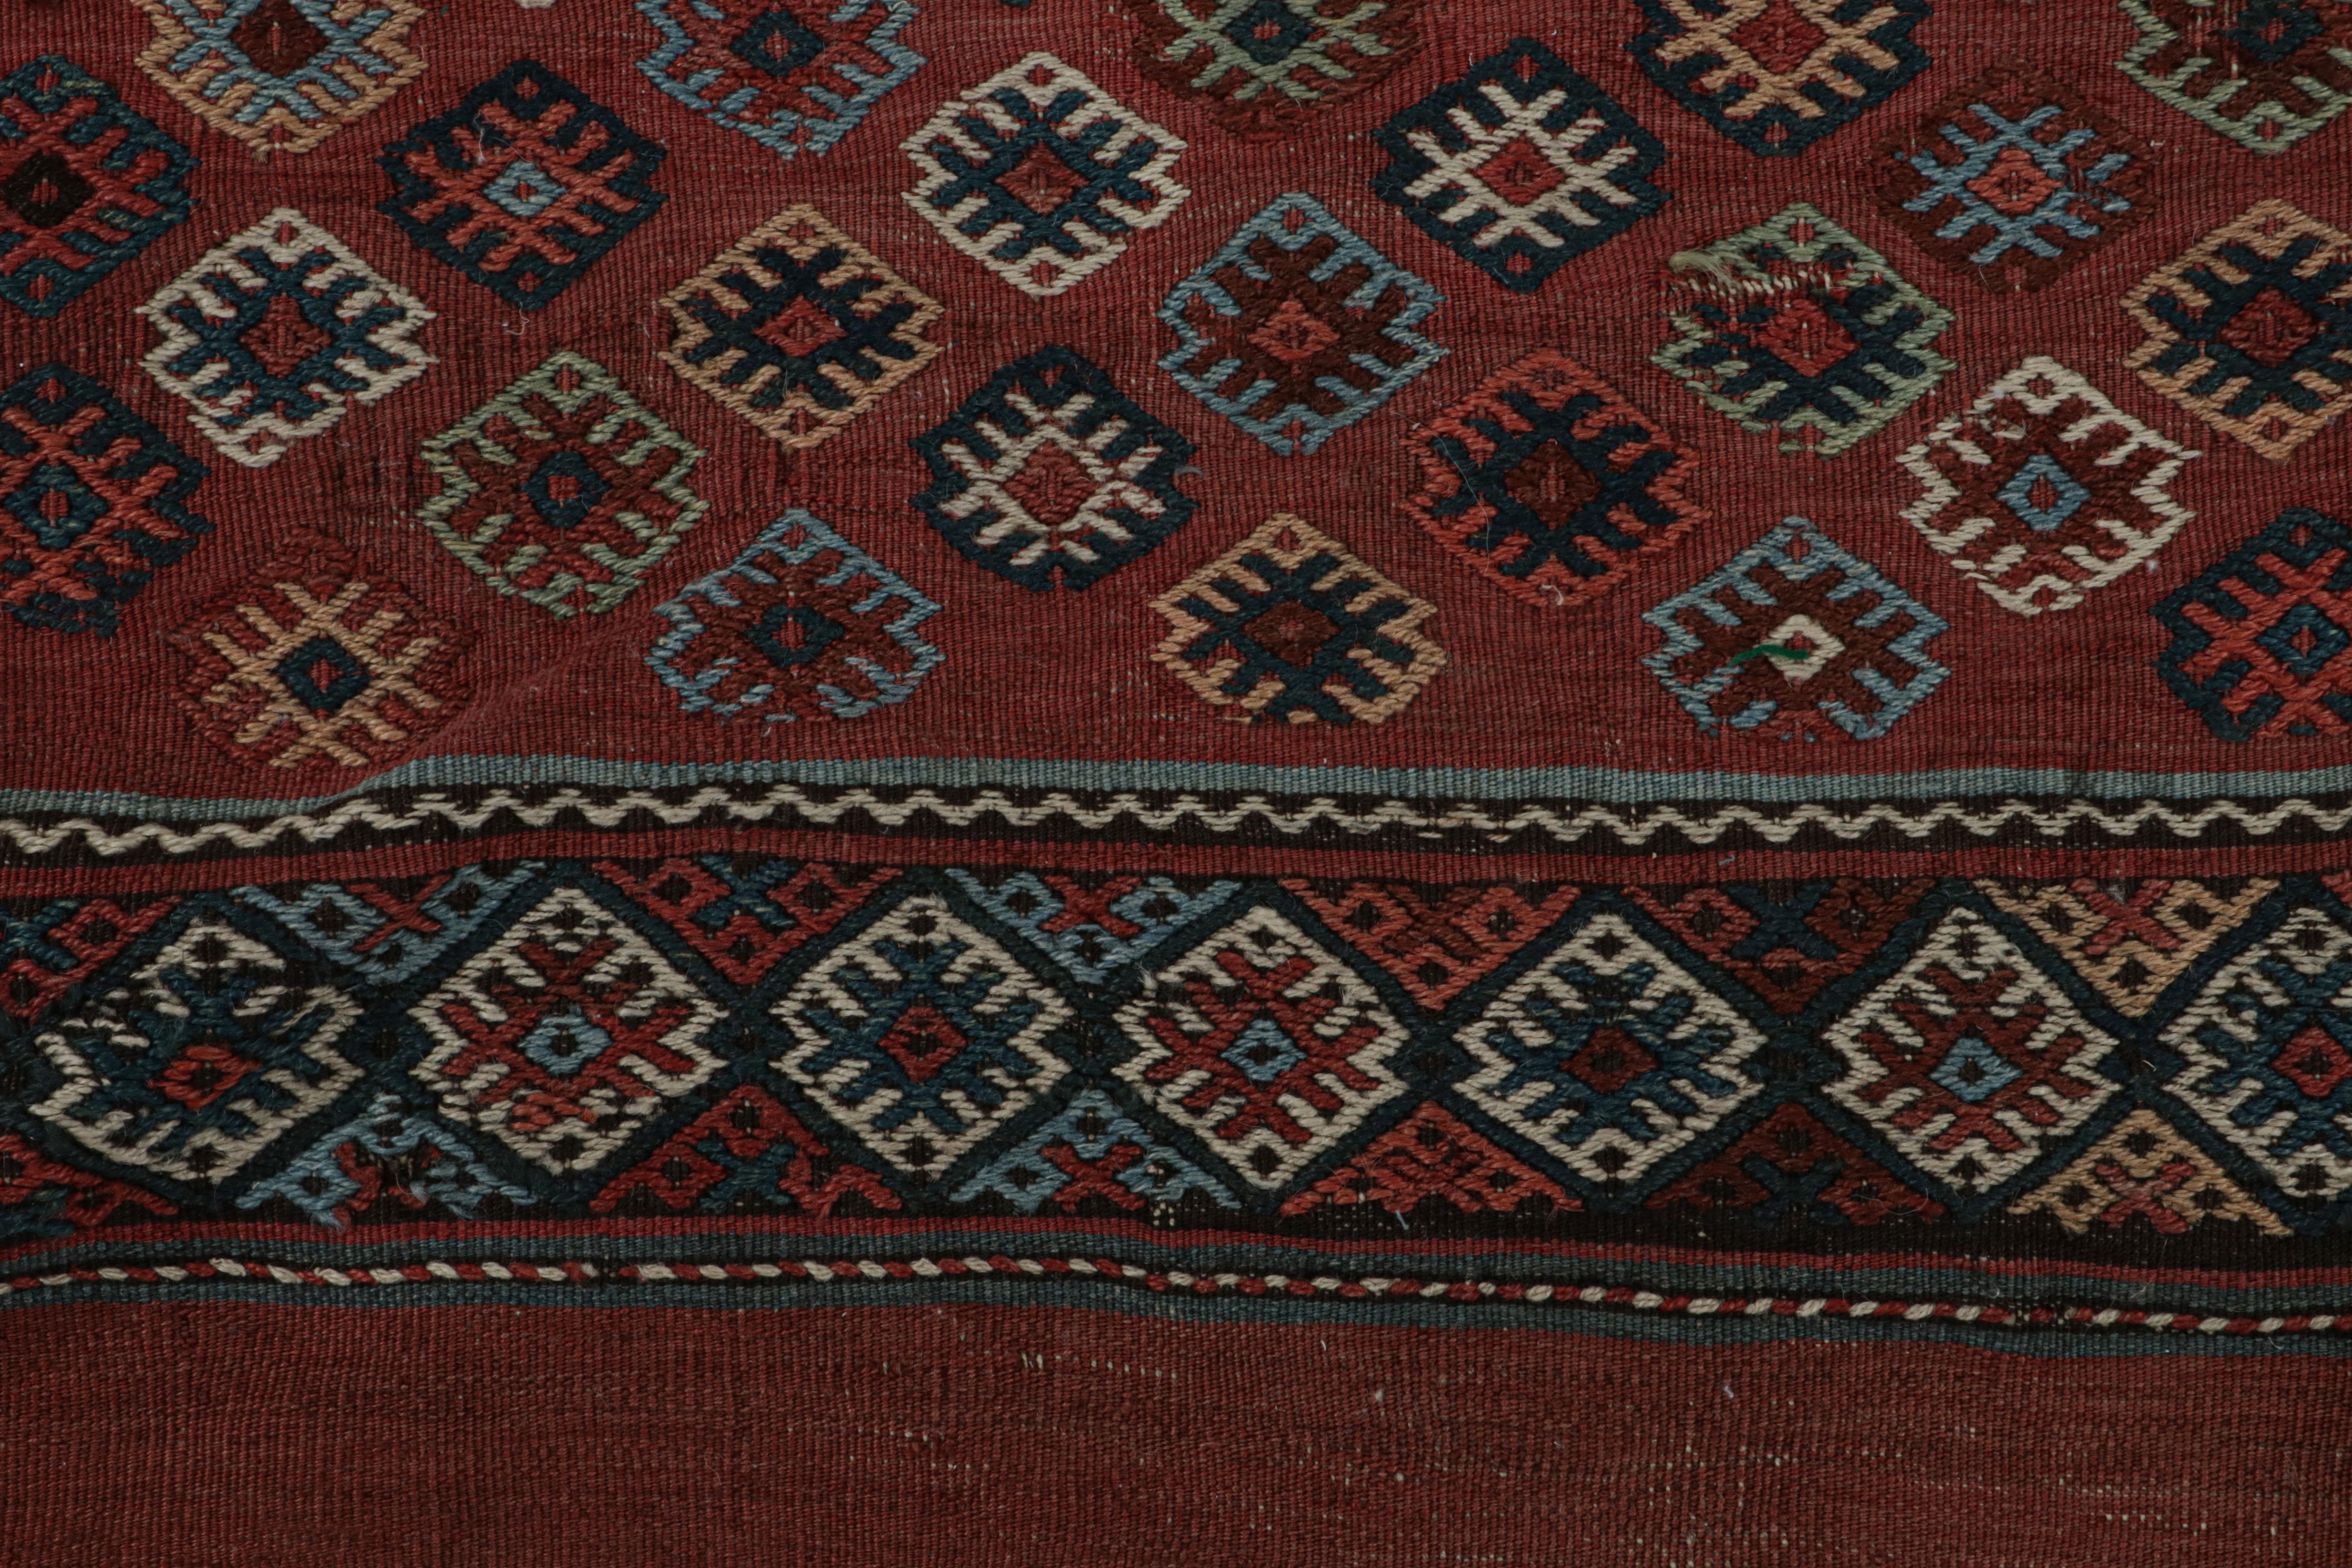 Wool Antique Turkish Bag Kilim in Red with Geometric Patterns, from Rug & Kilim For Sale